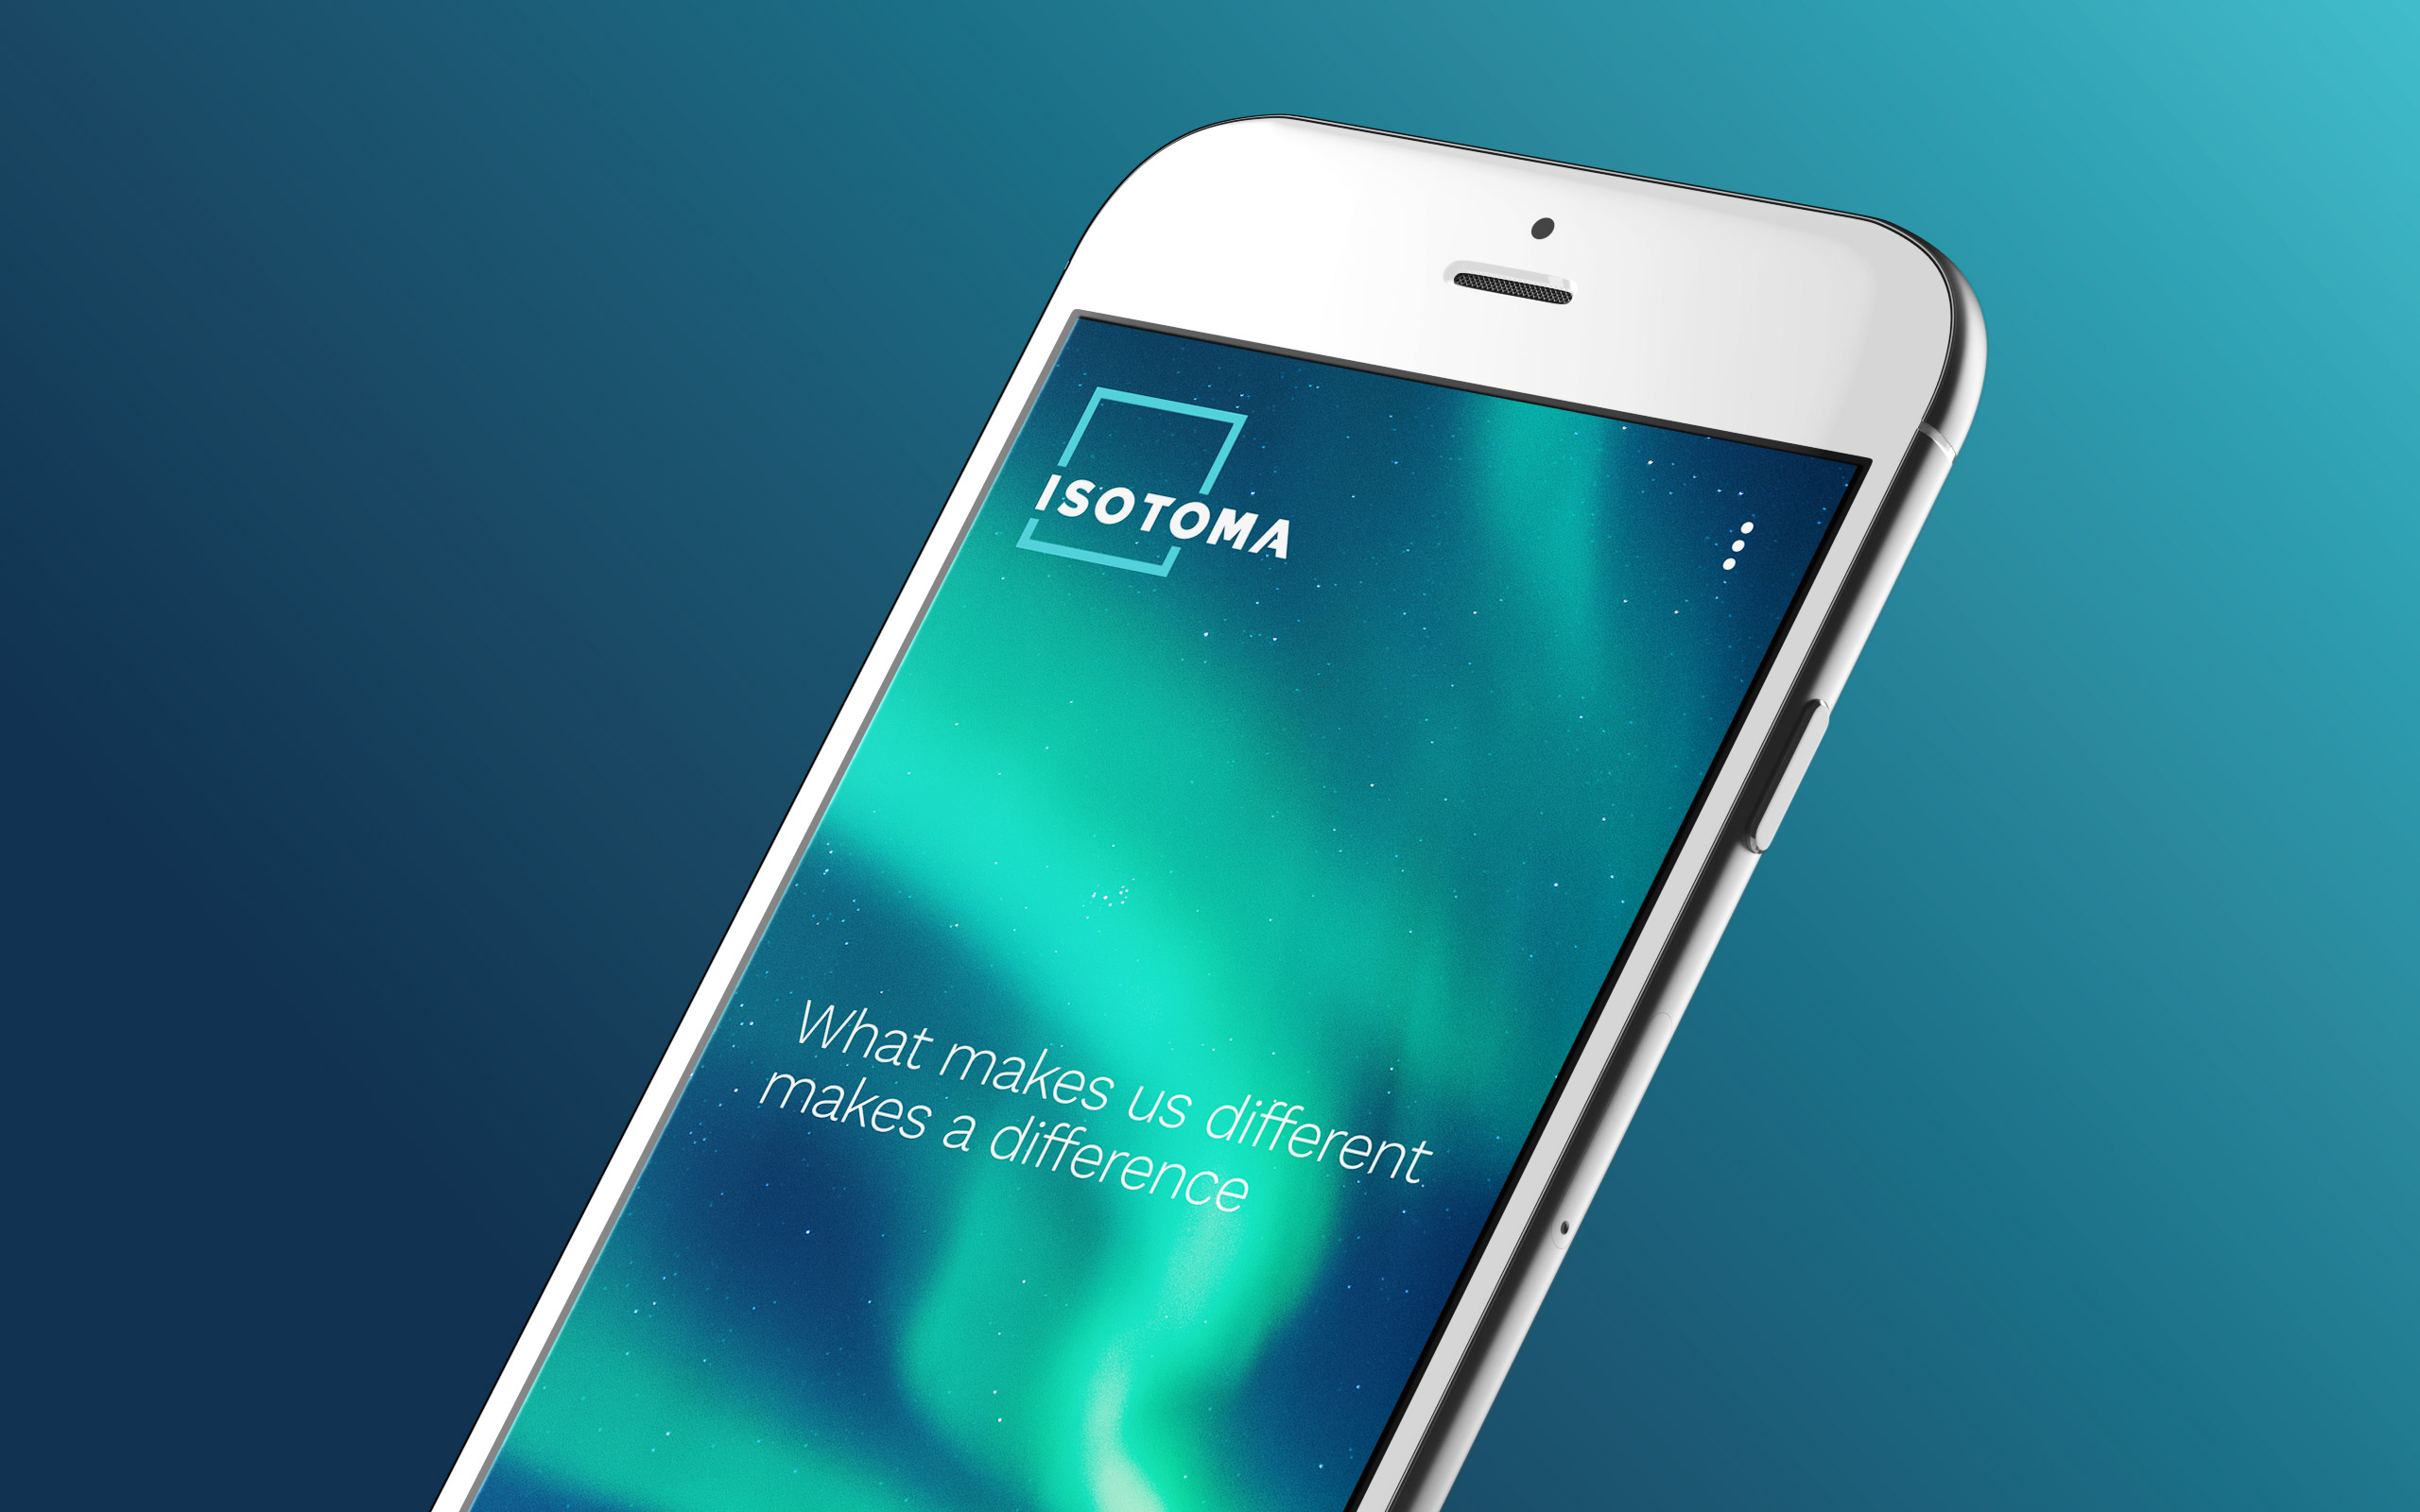 Isotoma mobile apps